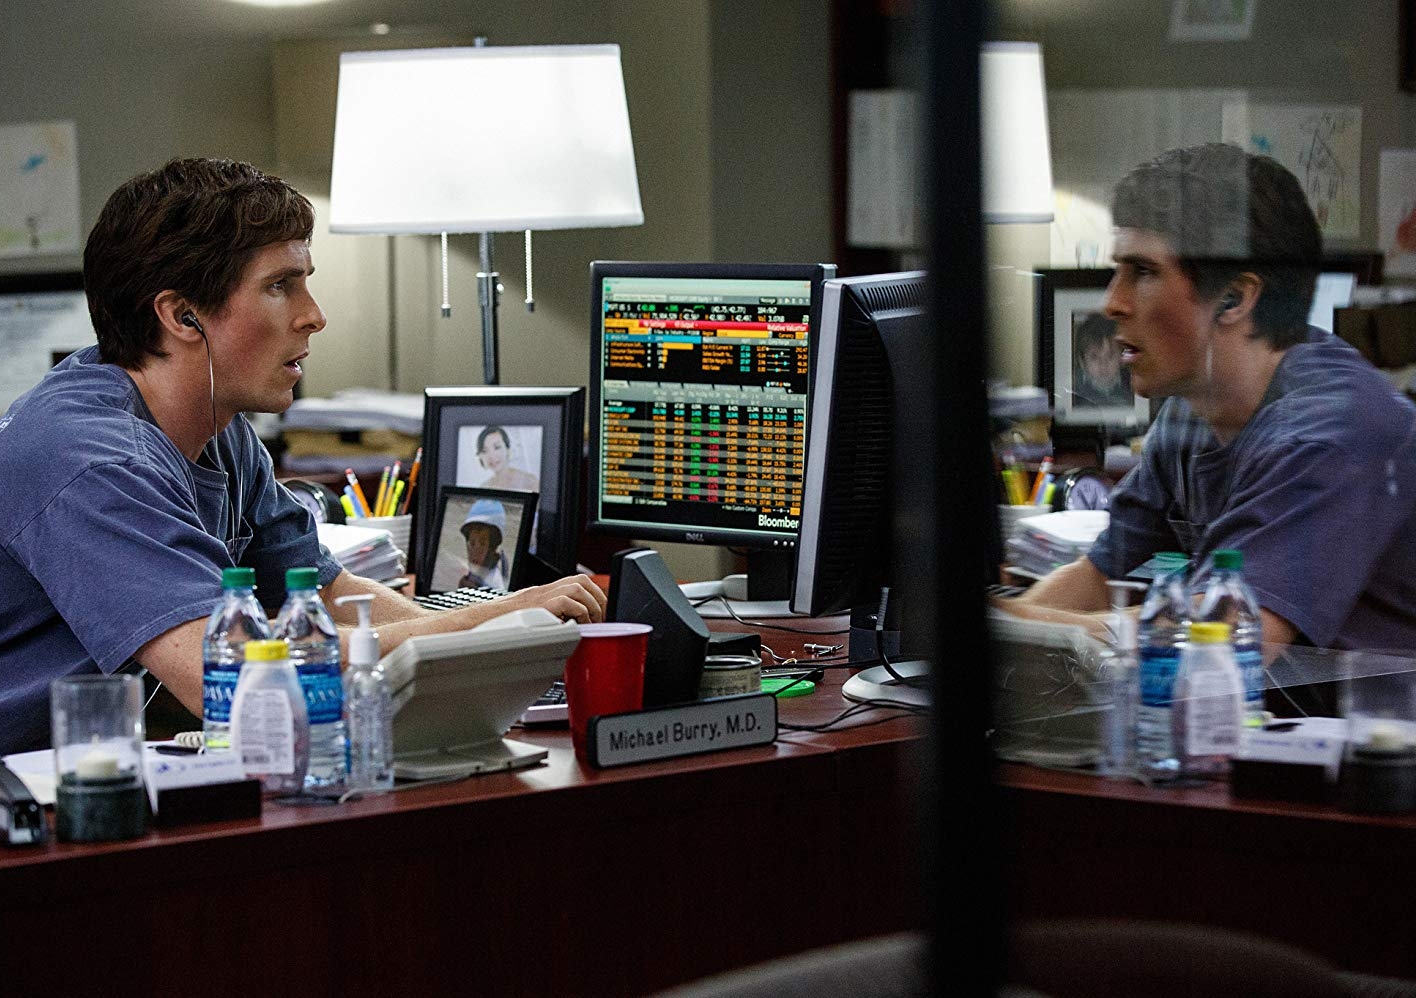 Christian Bale plays quirky hedge fund Michael Burry in The Big Short (2015). Image from www.imdb.com